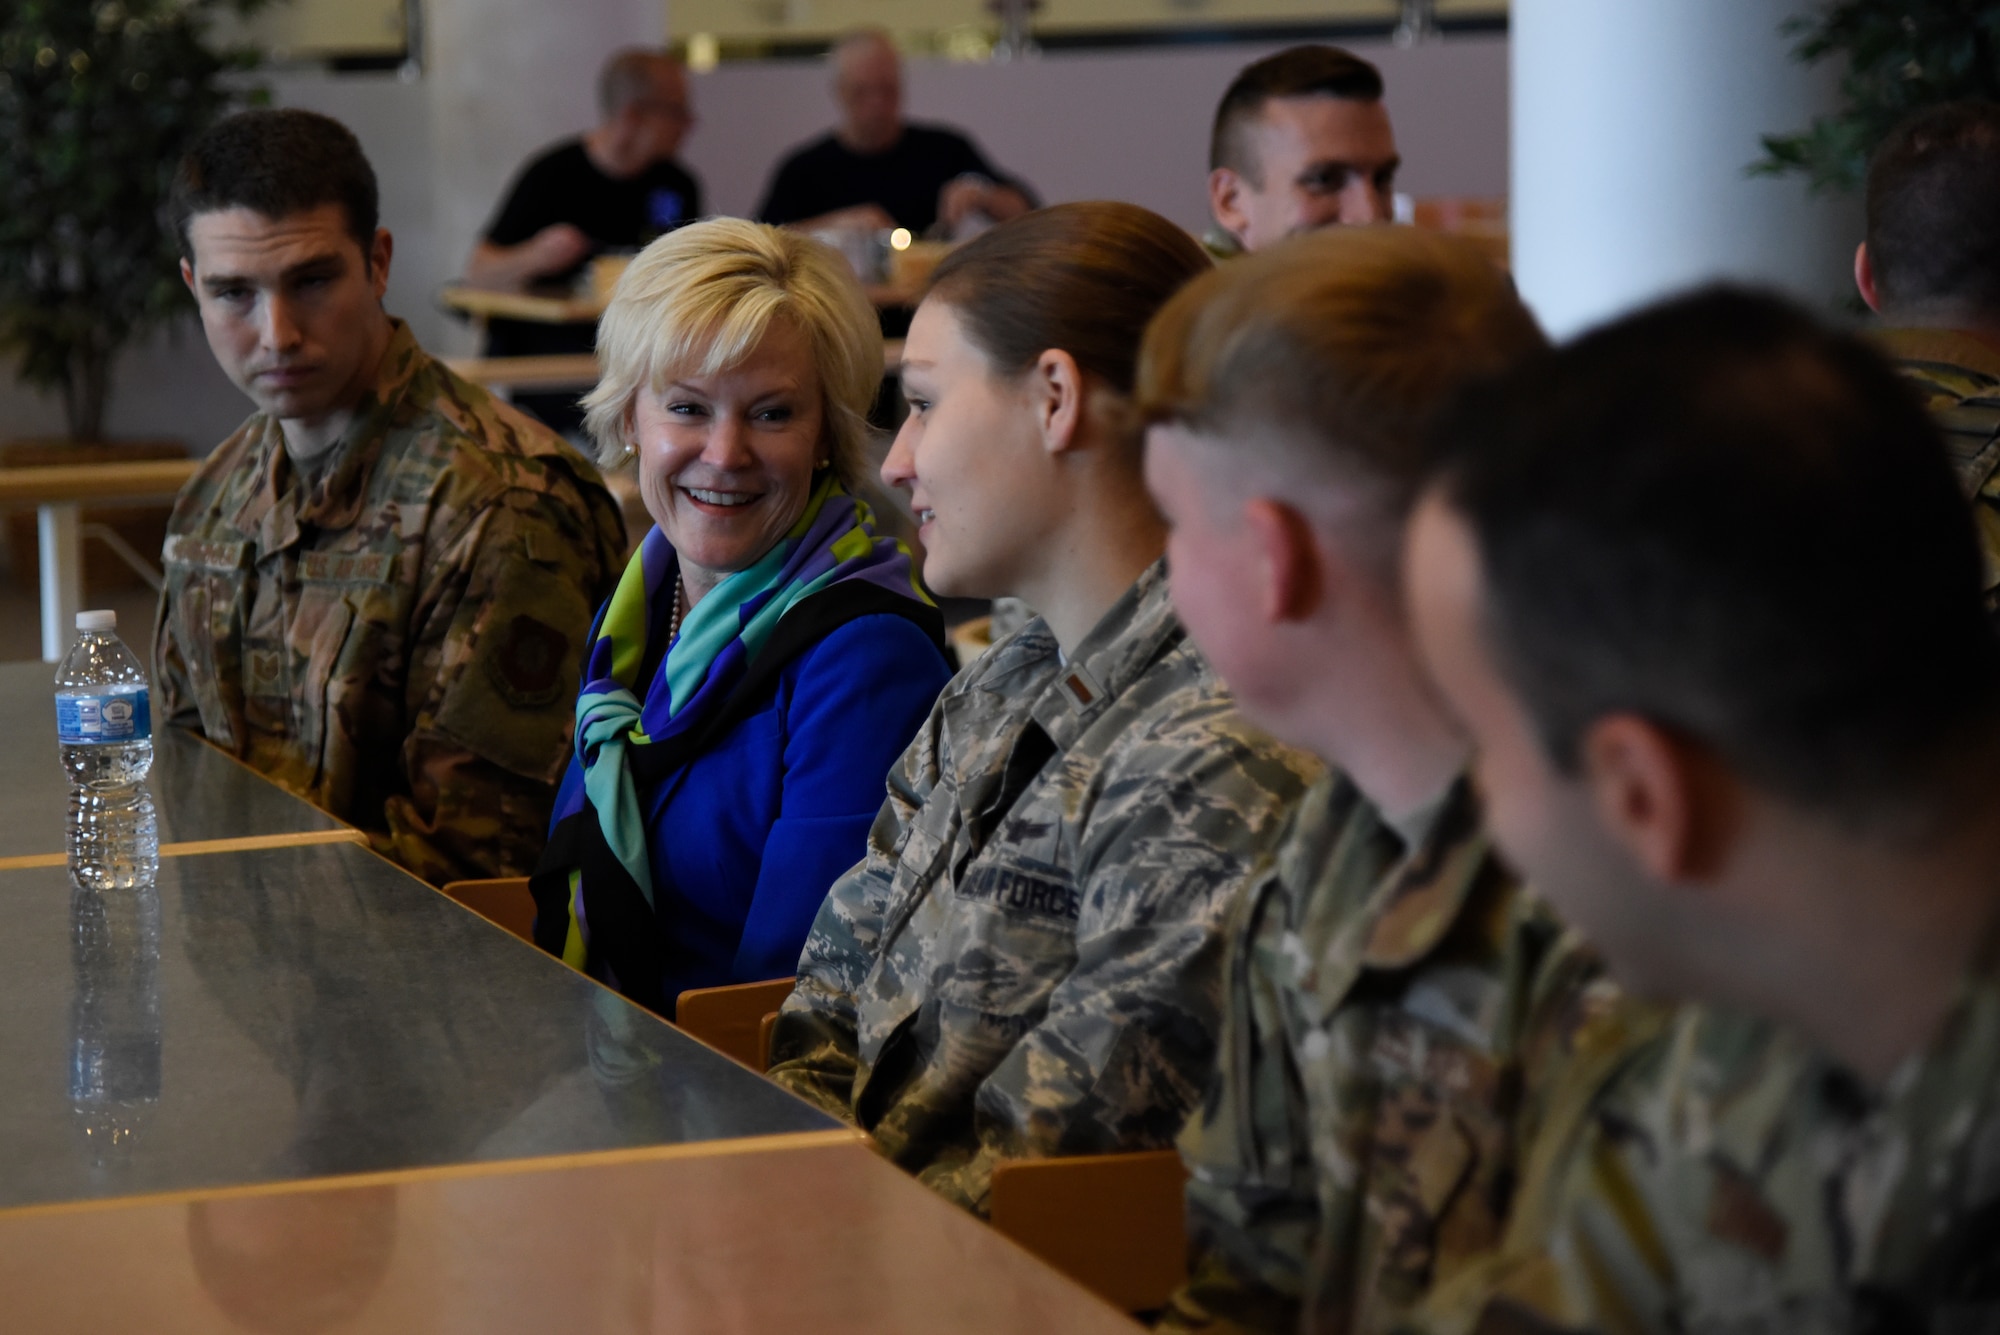 Dawn Goldfein, wife of Air Force Chief of Staff General David Goldfein, visits with 821st Air Base Group Airmen during a visit to Thule, Greenland, July 20, 2019. During their visit, the Goldfeins toured various work centers throughout the group and spoke to Airmen. (U.S. Air Force photo by Staff Sgt. Alexandra M. Longfellow)